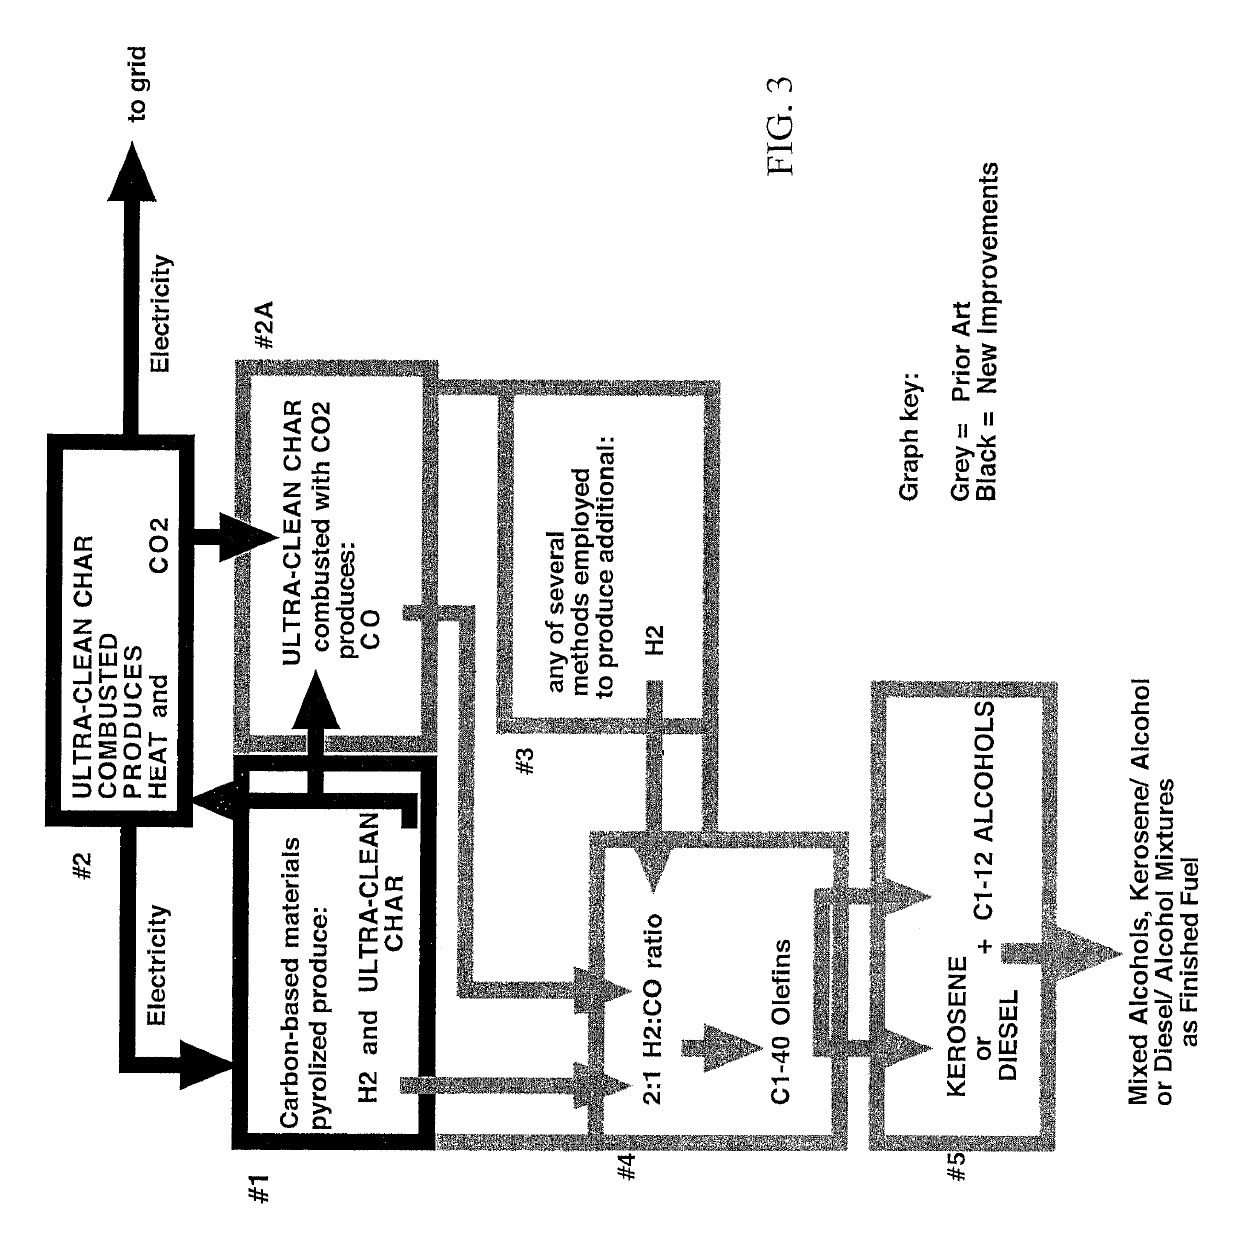 Production and use of ultra-clean carbon compounds and uniform heat from carbon-based feedstocks